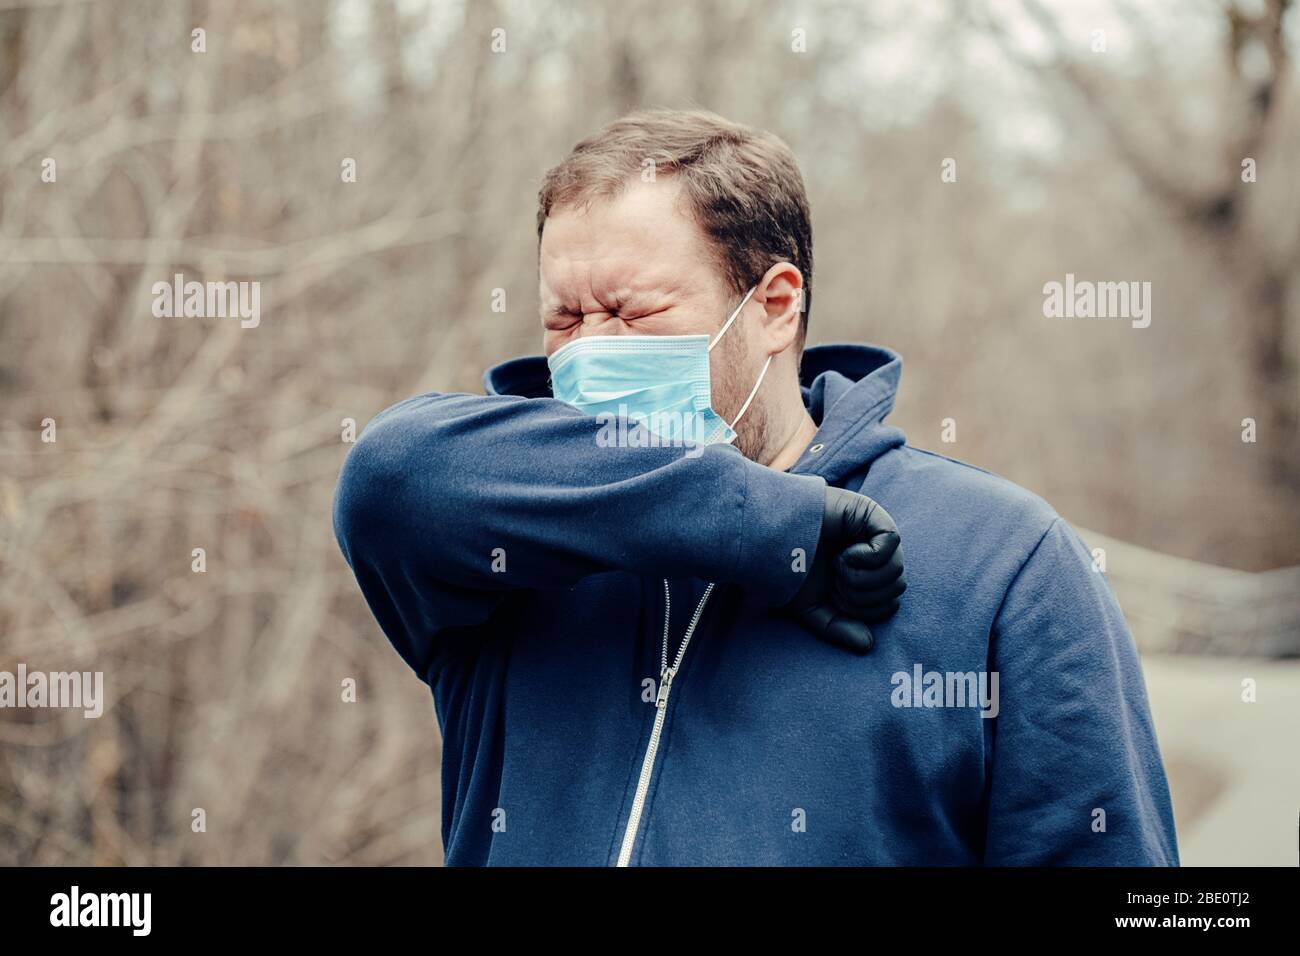 Caucasian young middle age man in sanitary face mask sneezing coughing outdoor. Person protecting from dangerous spread of virus. Coronavirus COVID-19 Stock Photo